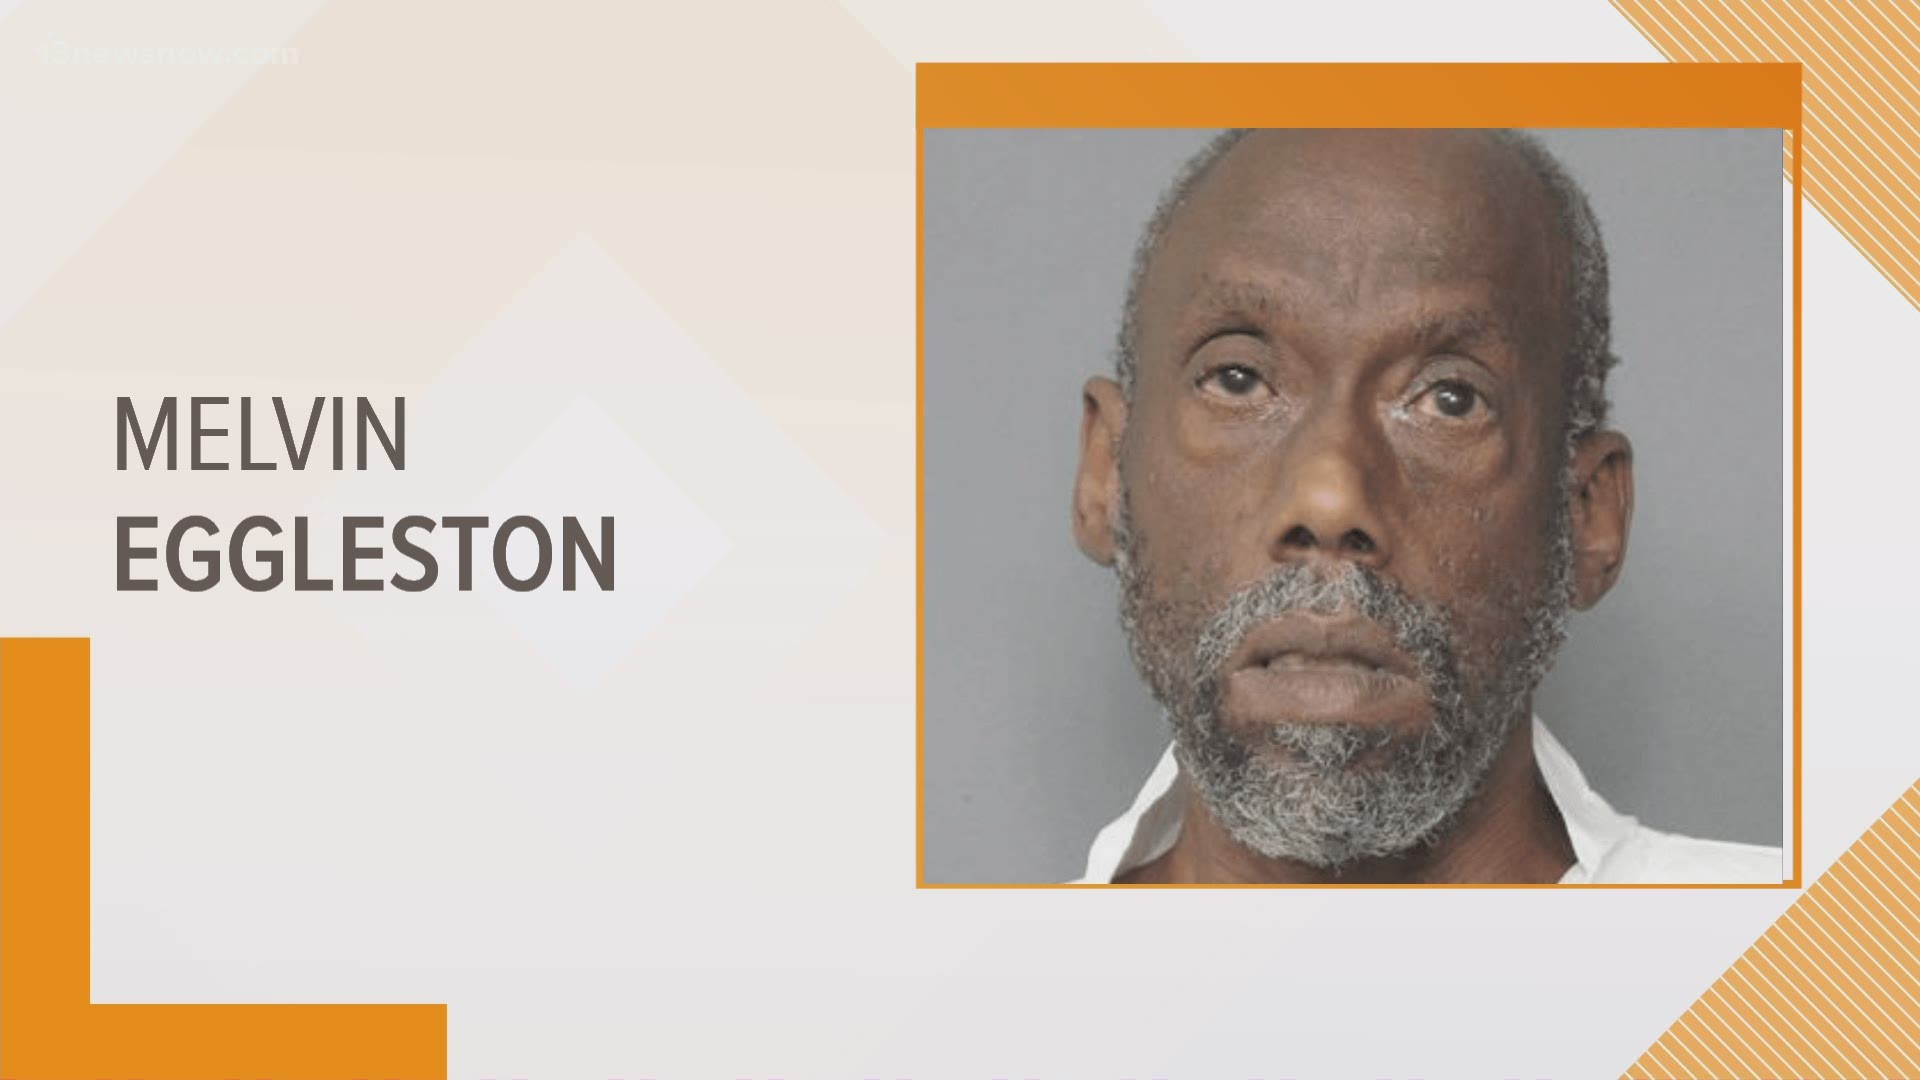 Norfolk police said Melvin Eggleston, 62, has been taken into custody and charged with second-degree murder after a man was stabbed on Bay Street Sunday morning.